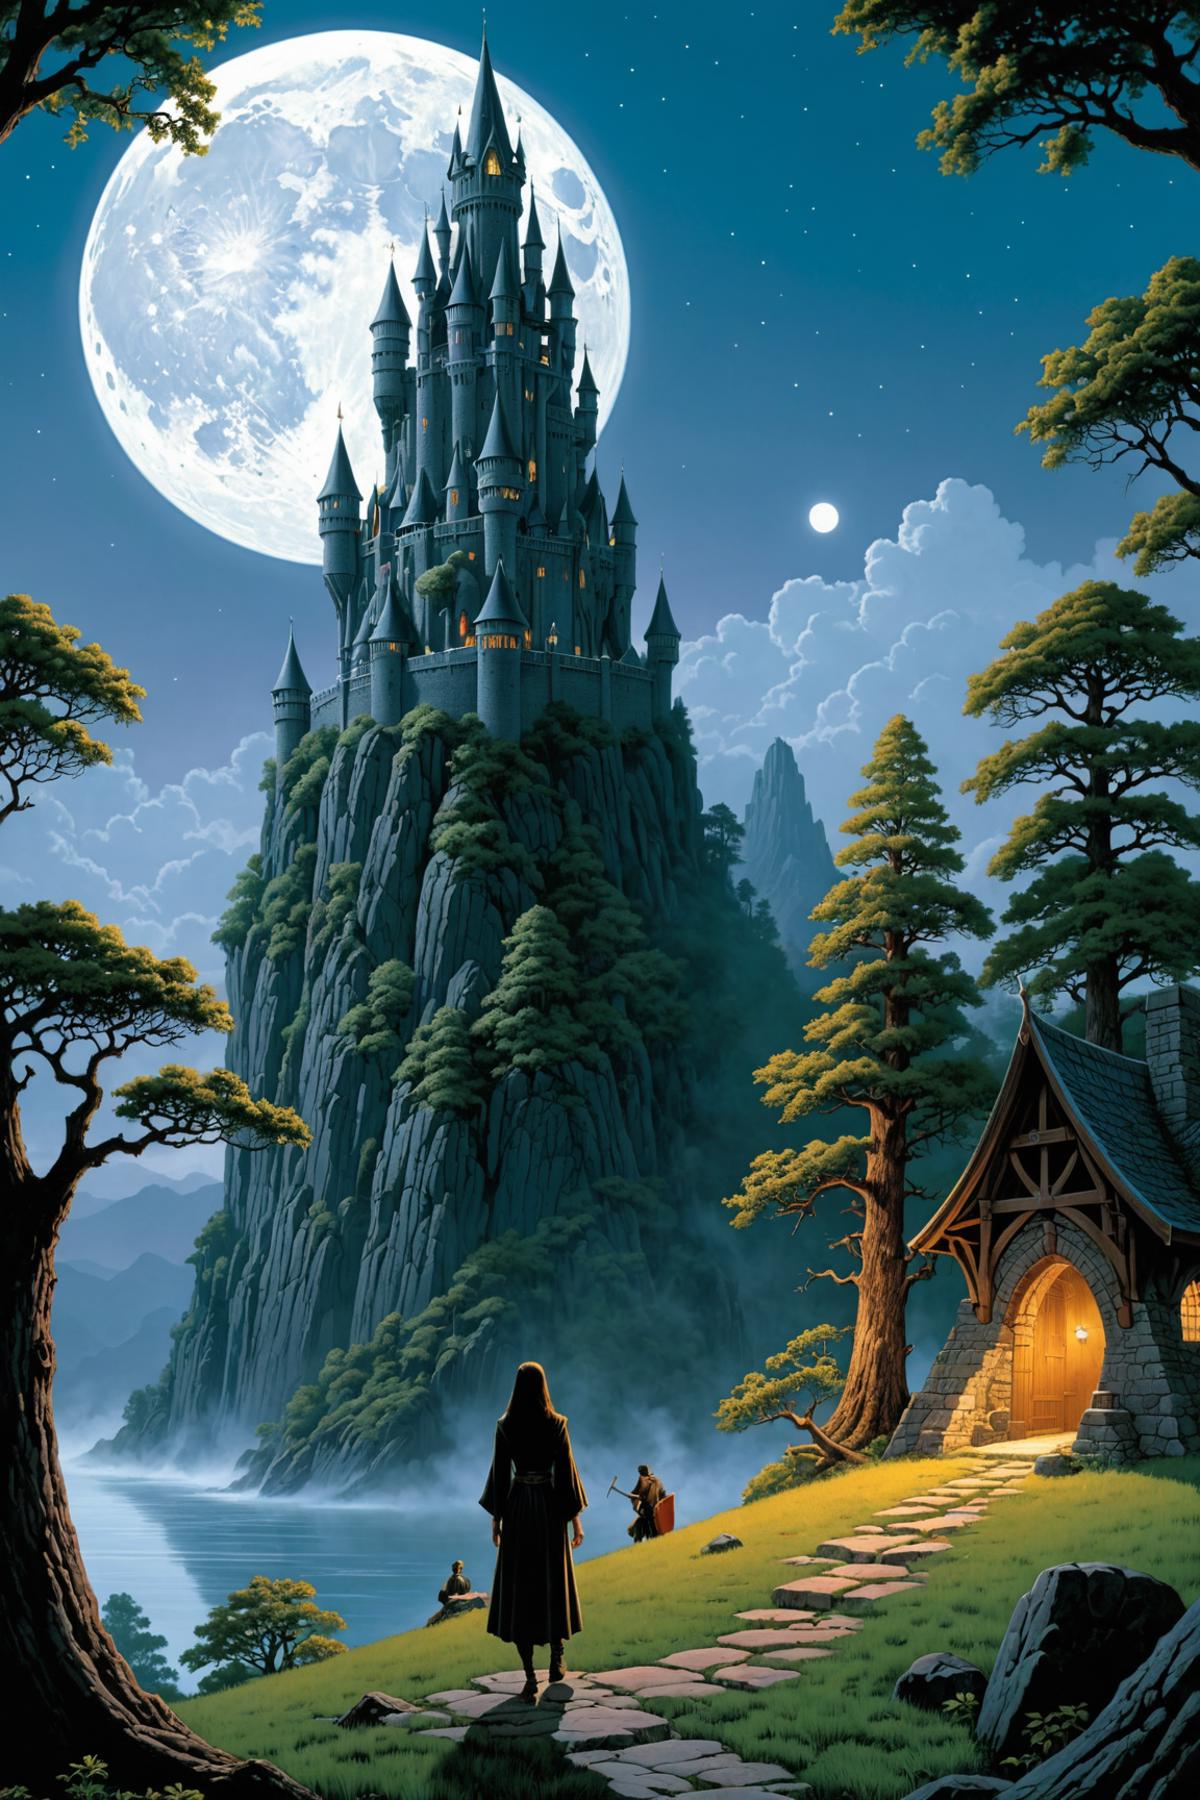 A person standing in front of a castle at night, with the moon in the sky.